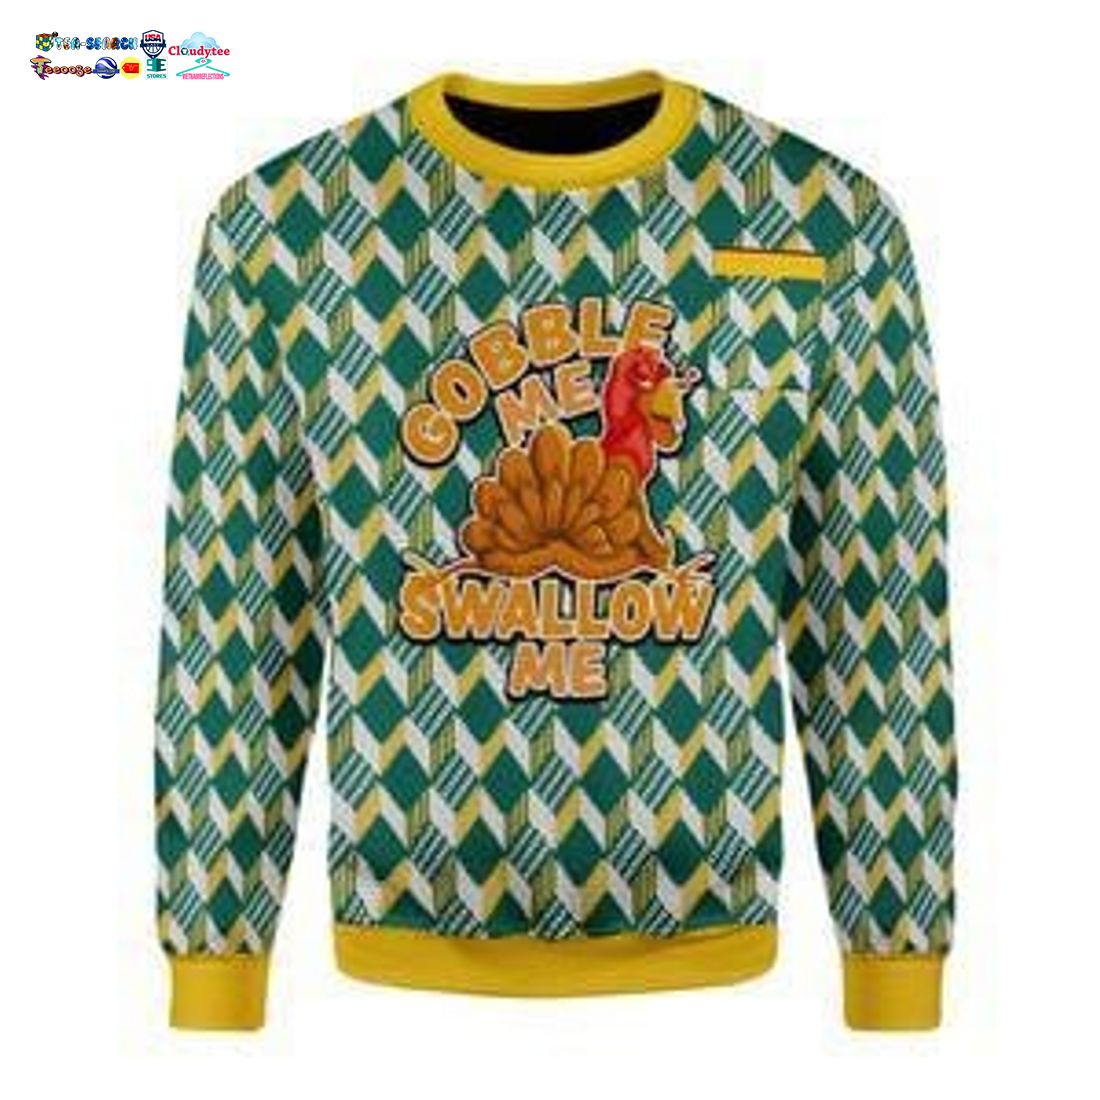 Turkey Gobble Me Swallow Me Ugly Christmas Sweater